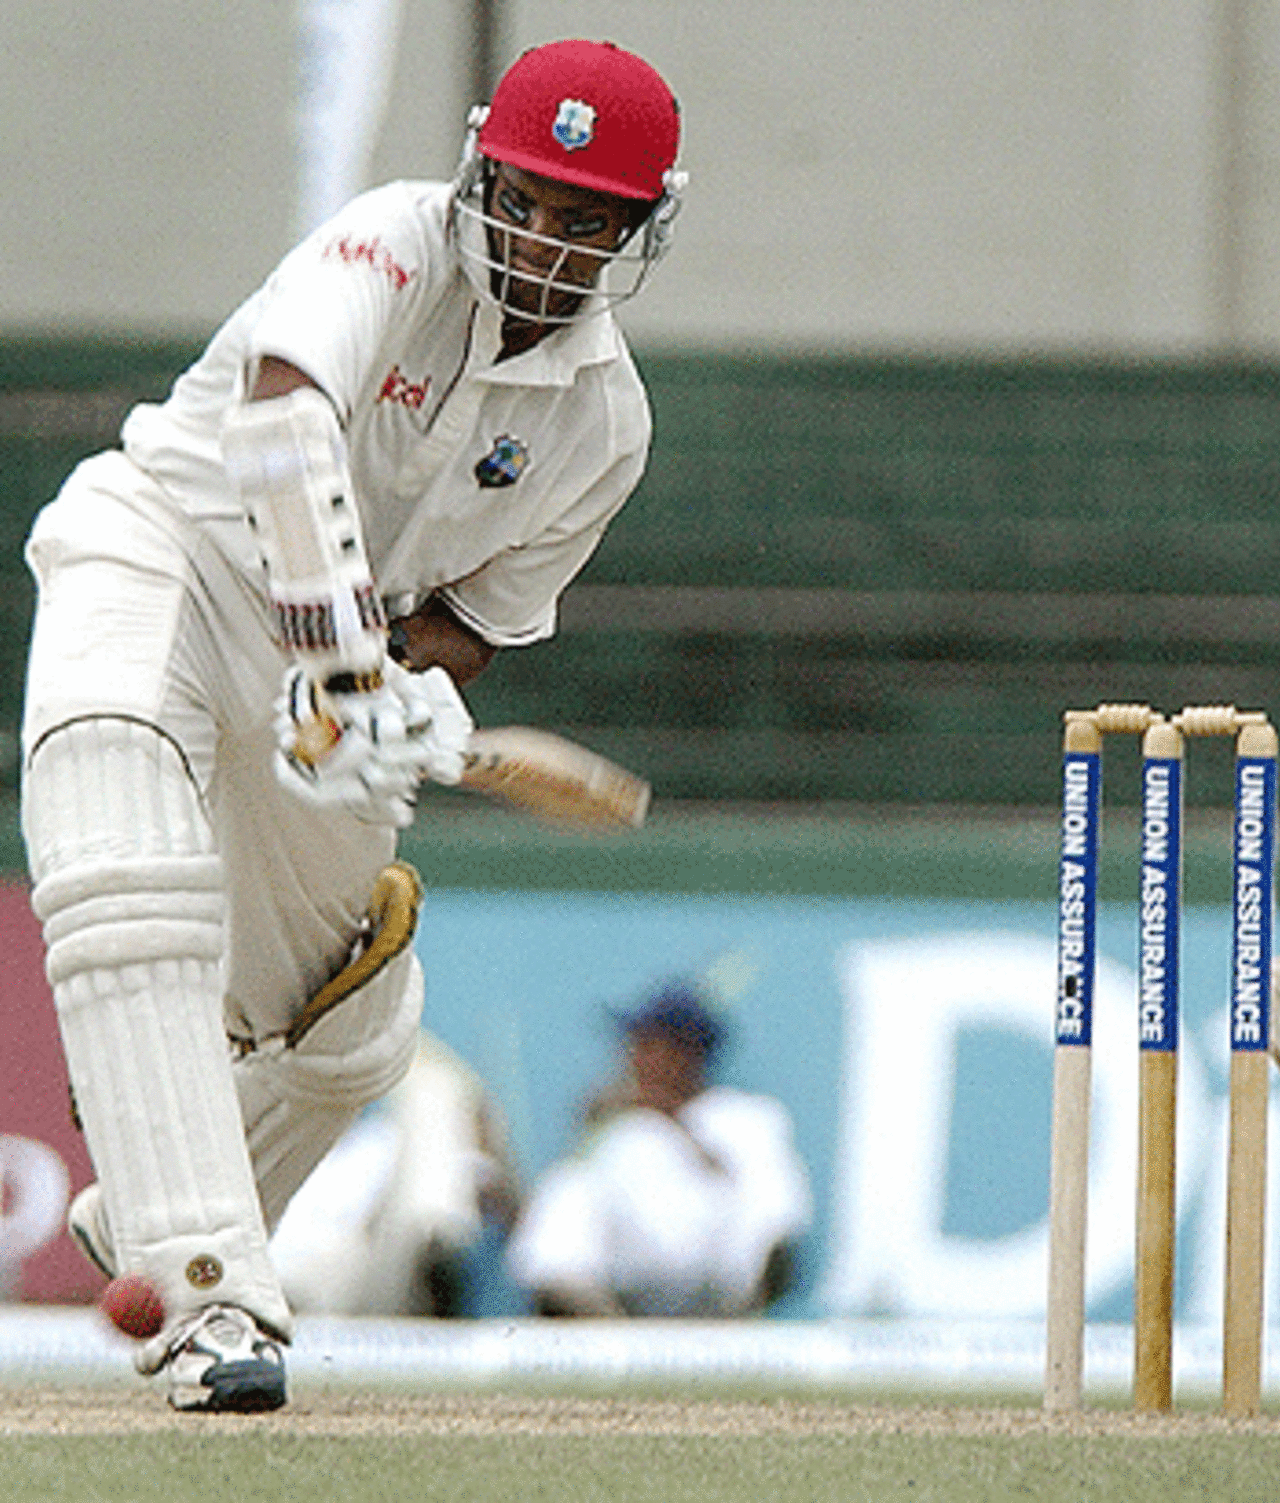 Shivnarine Chanderpaul plays a stroke during his knock of 69 not out, Sri Lanka v West Indies, 1st day, SSC, July 13, 2005